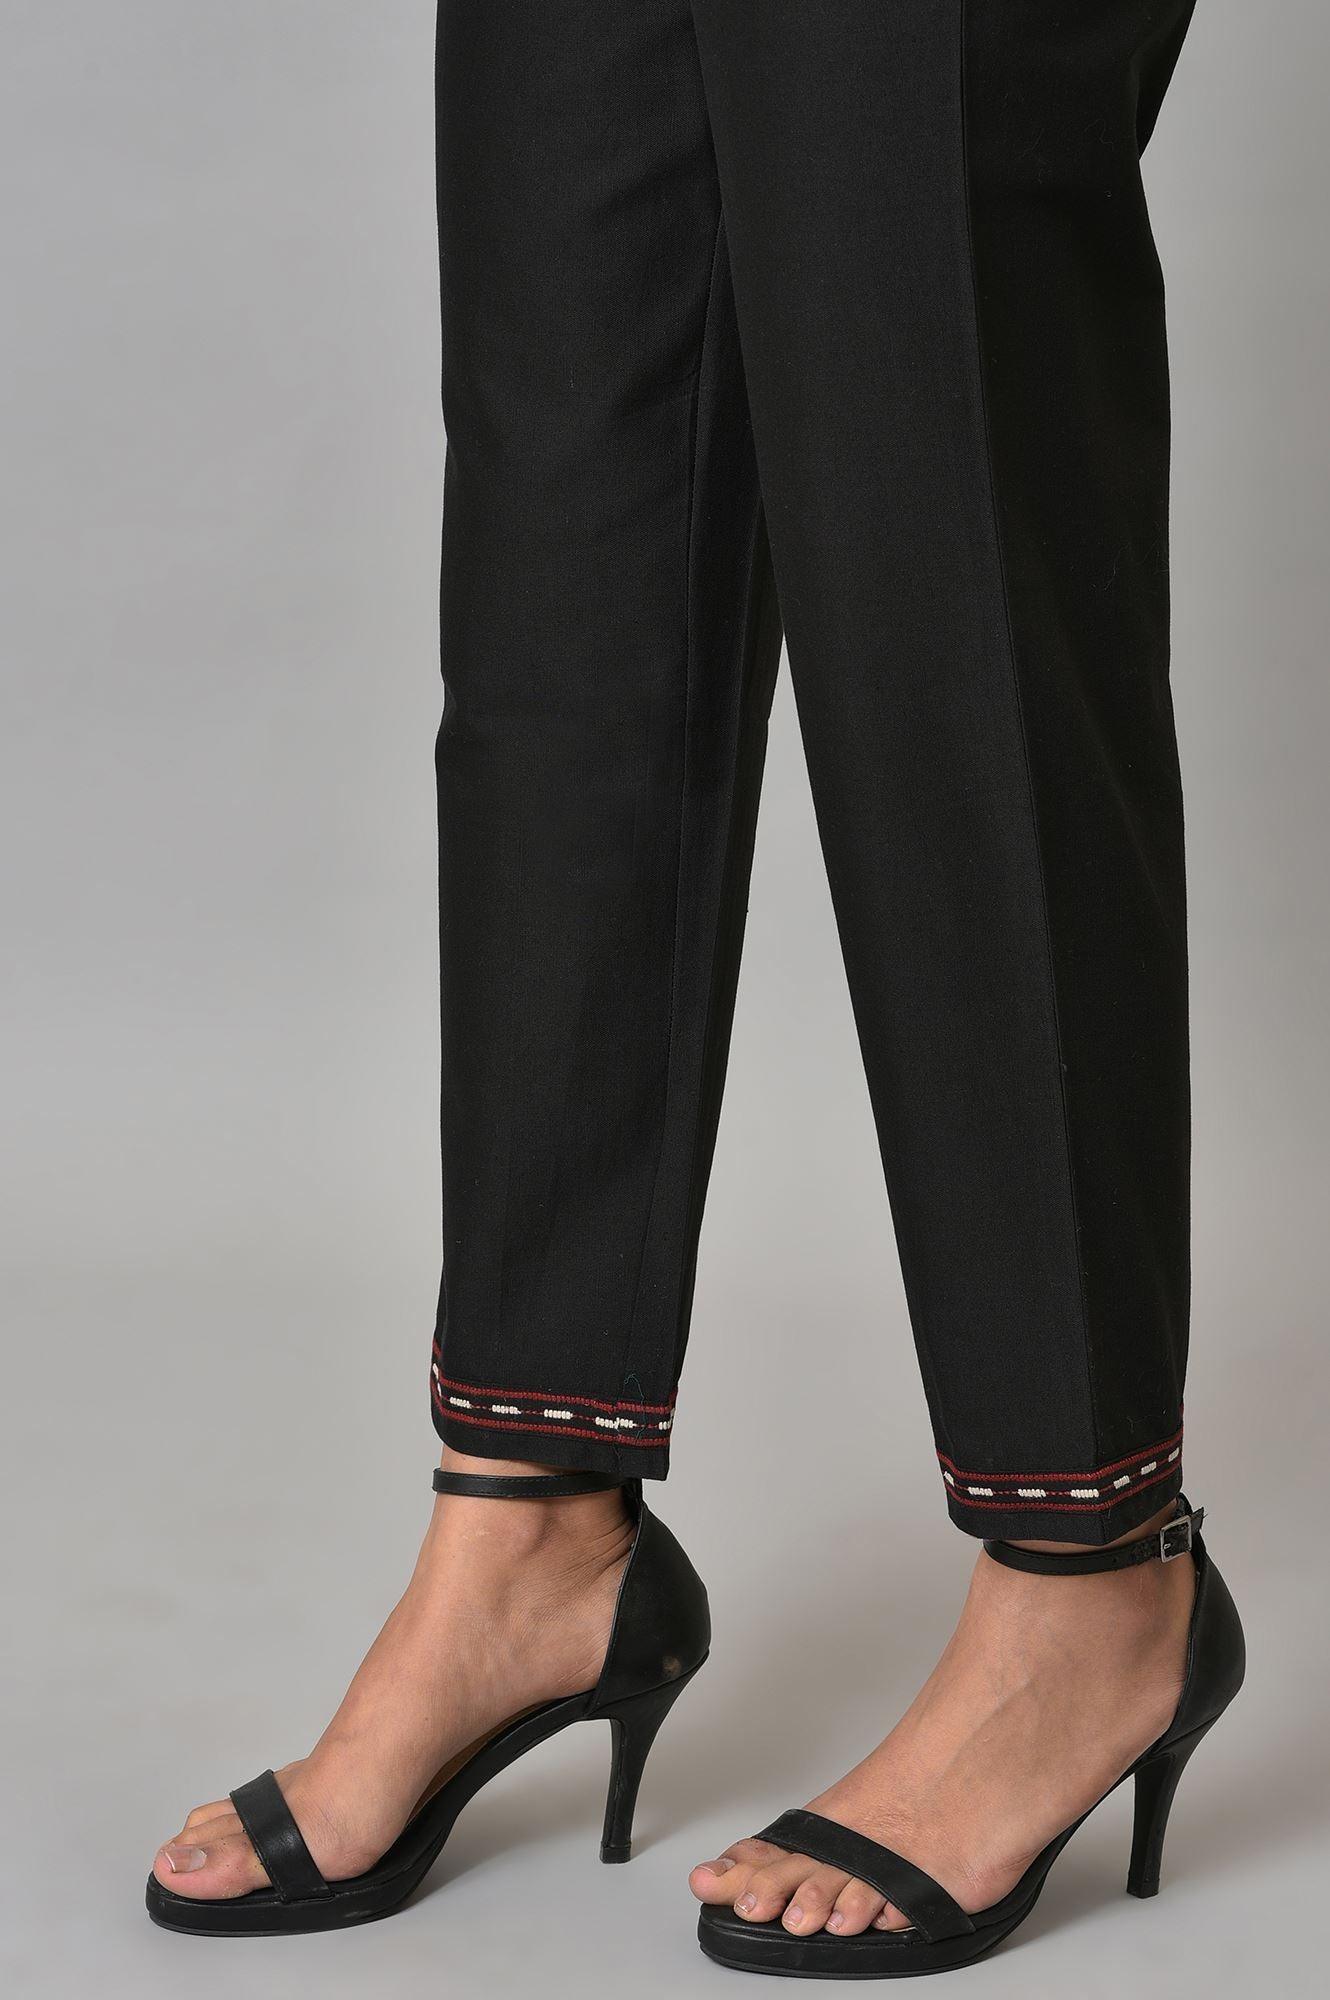 Plus Size Black Slim Pants With Embroidery At Hemline - wforwoman